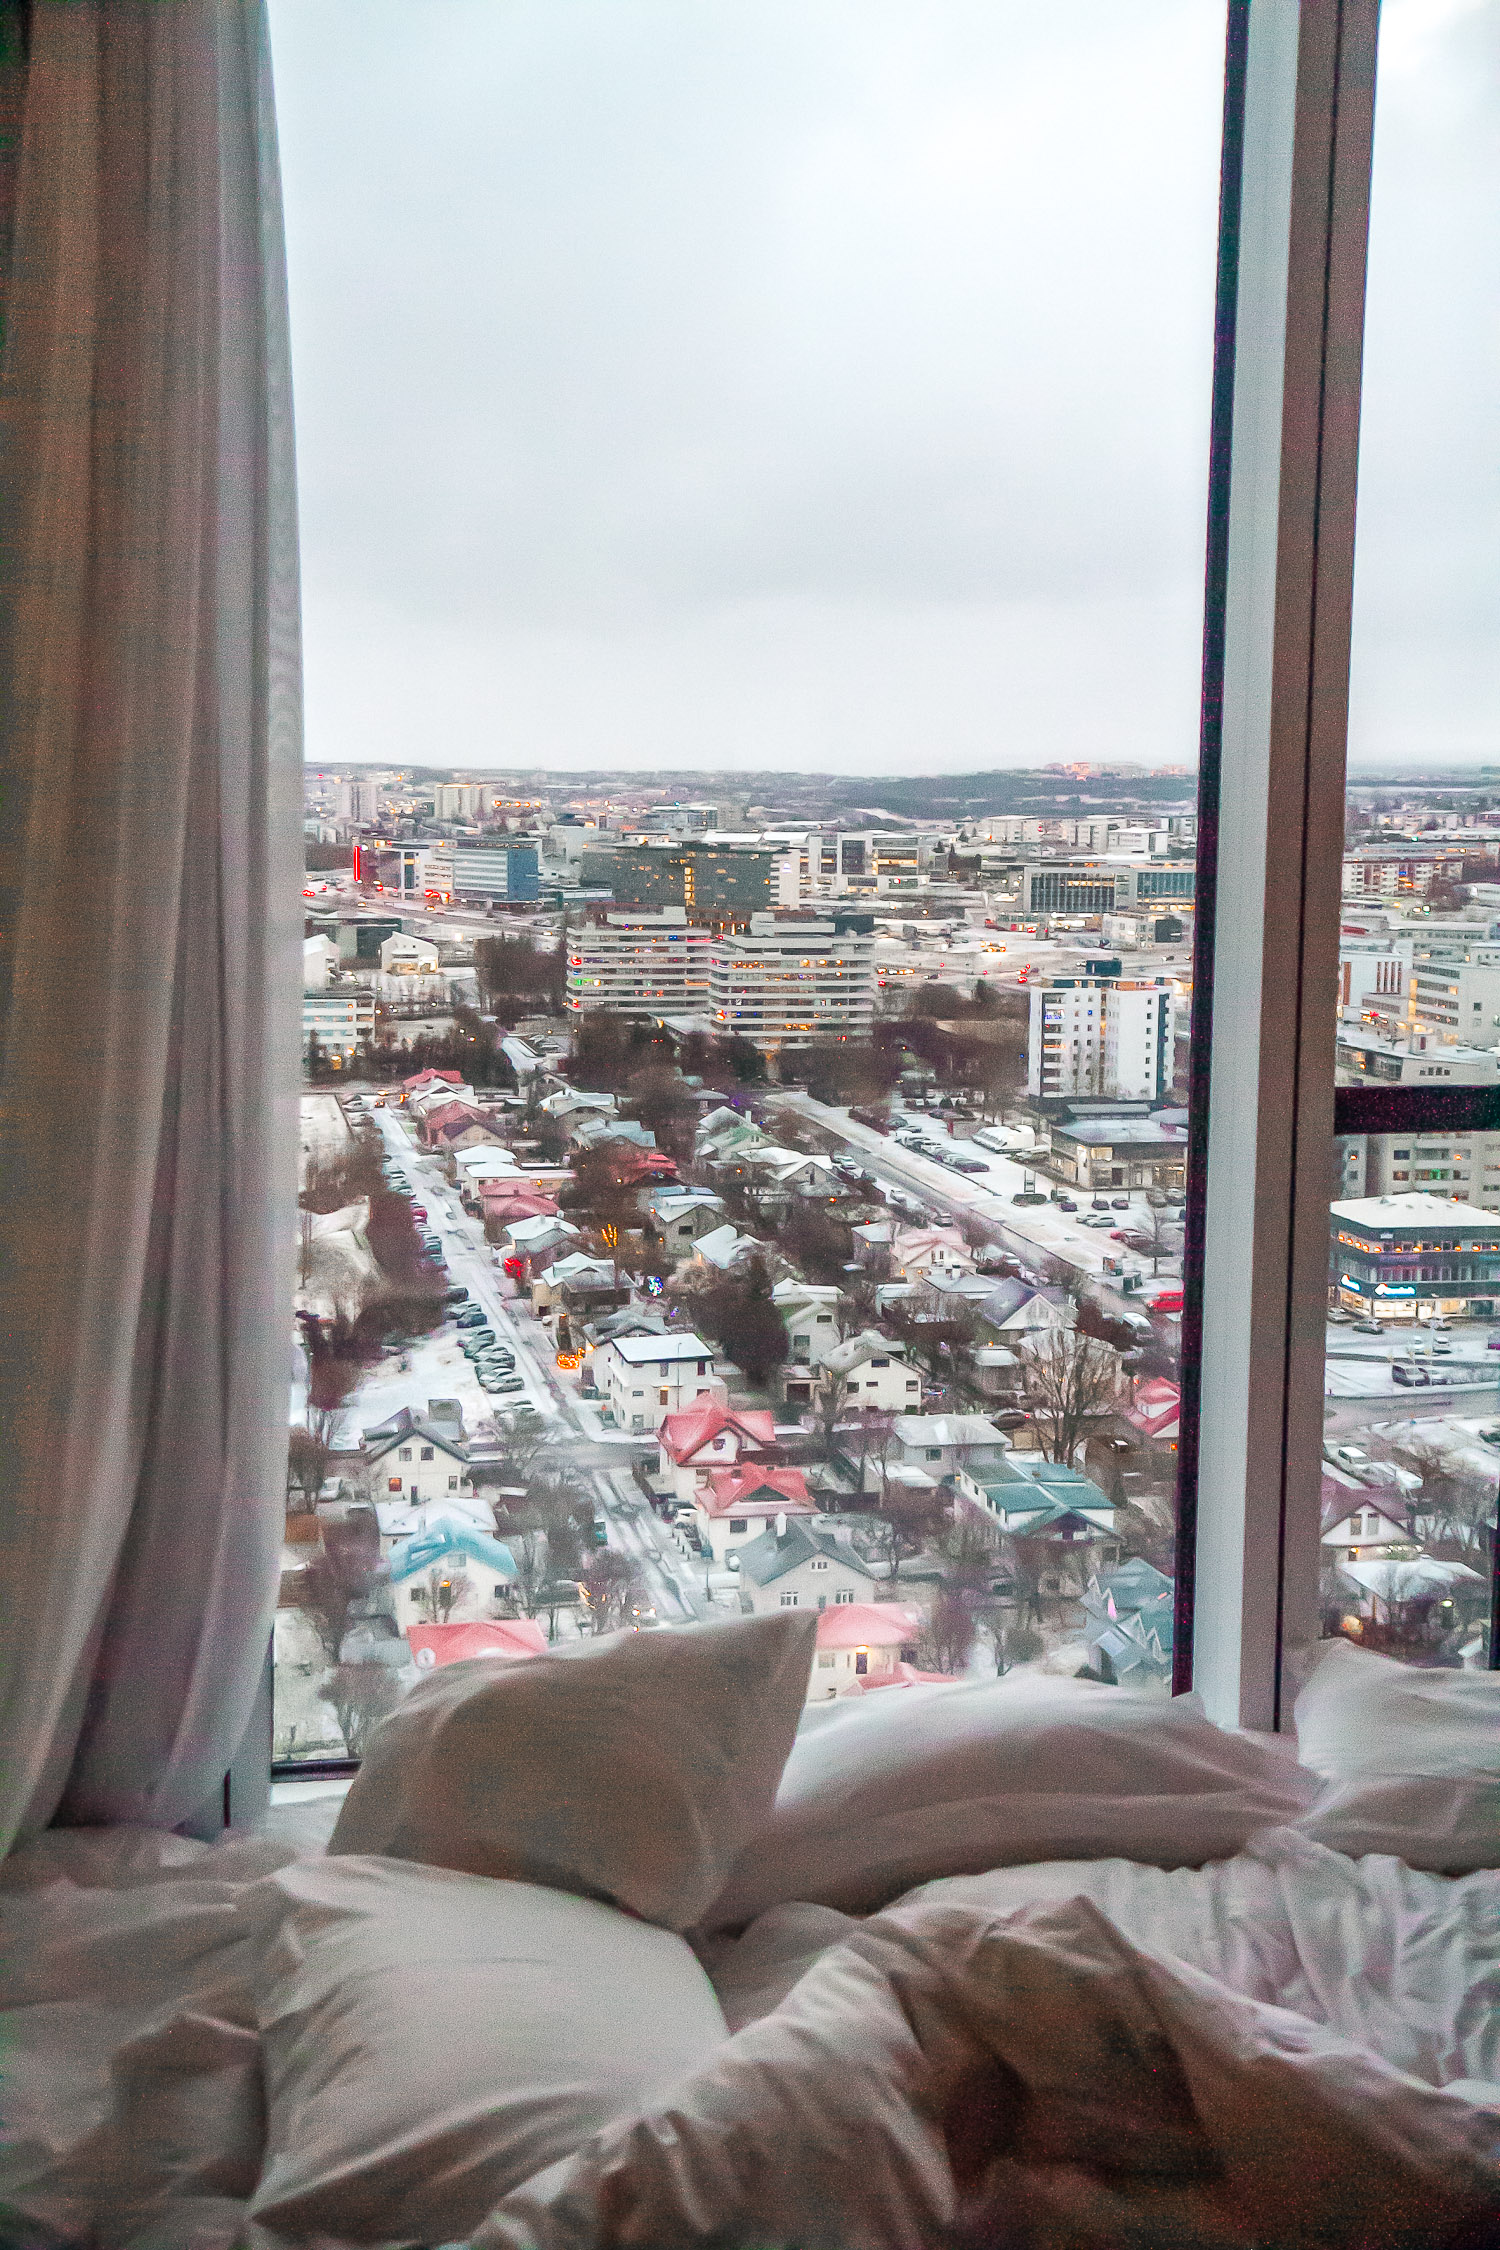 iceland tower suites